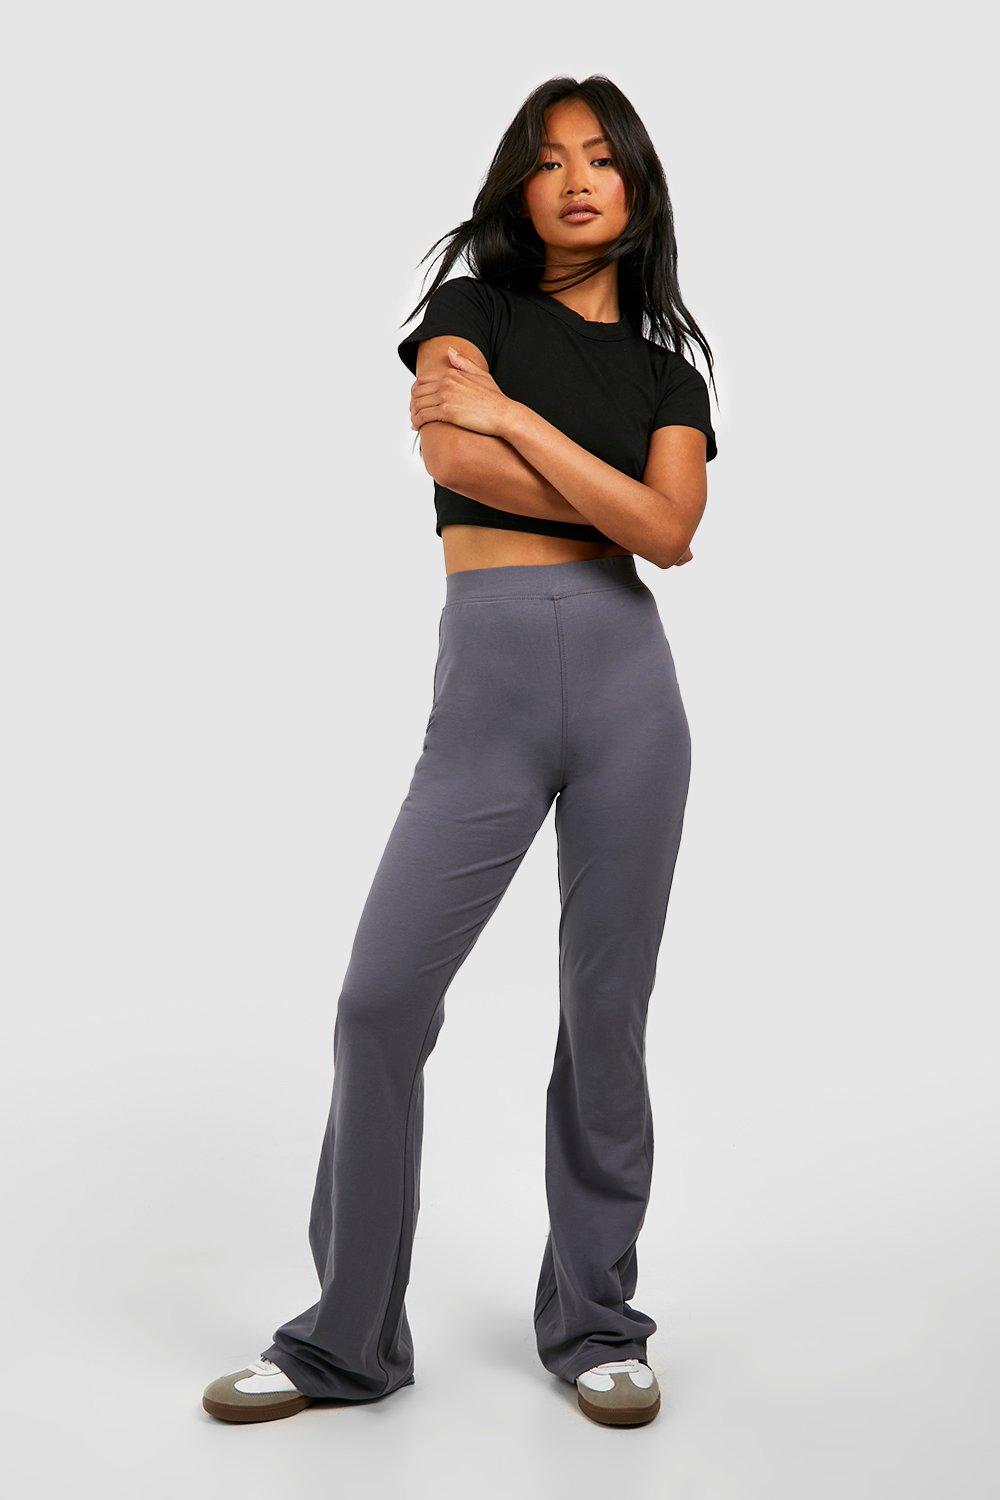 Grey Basic Cotton Blend Flared Trousers  Flared pants outfit, Flares  outfit, Outfits with leggings